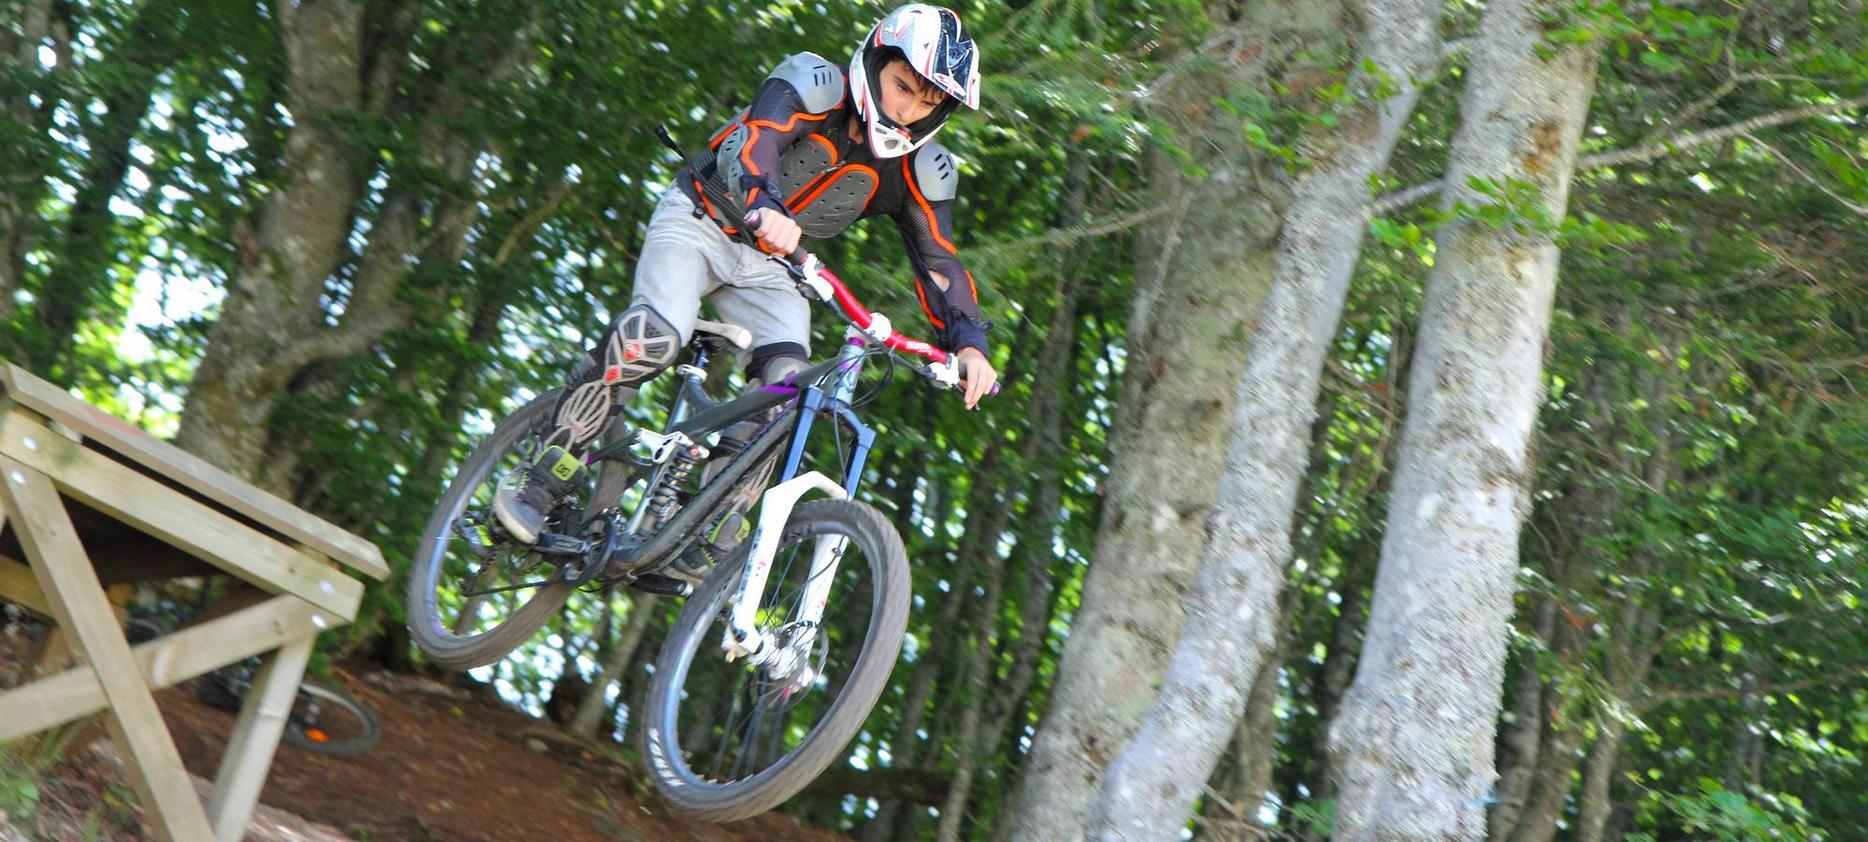 Downhill mountain biking in Super Besse, jumping from a springboard